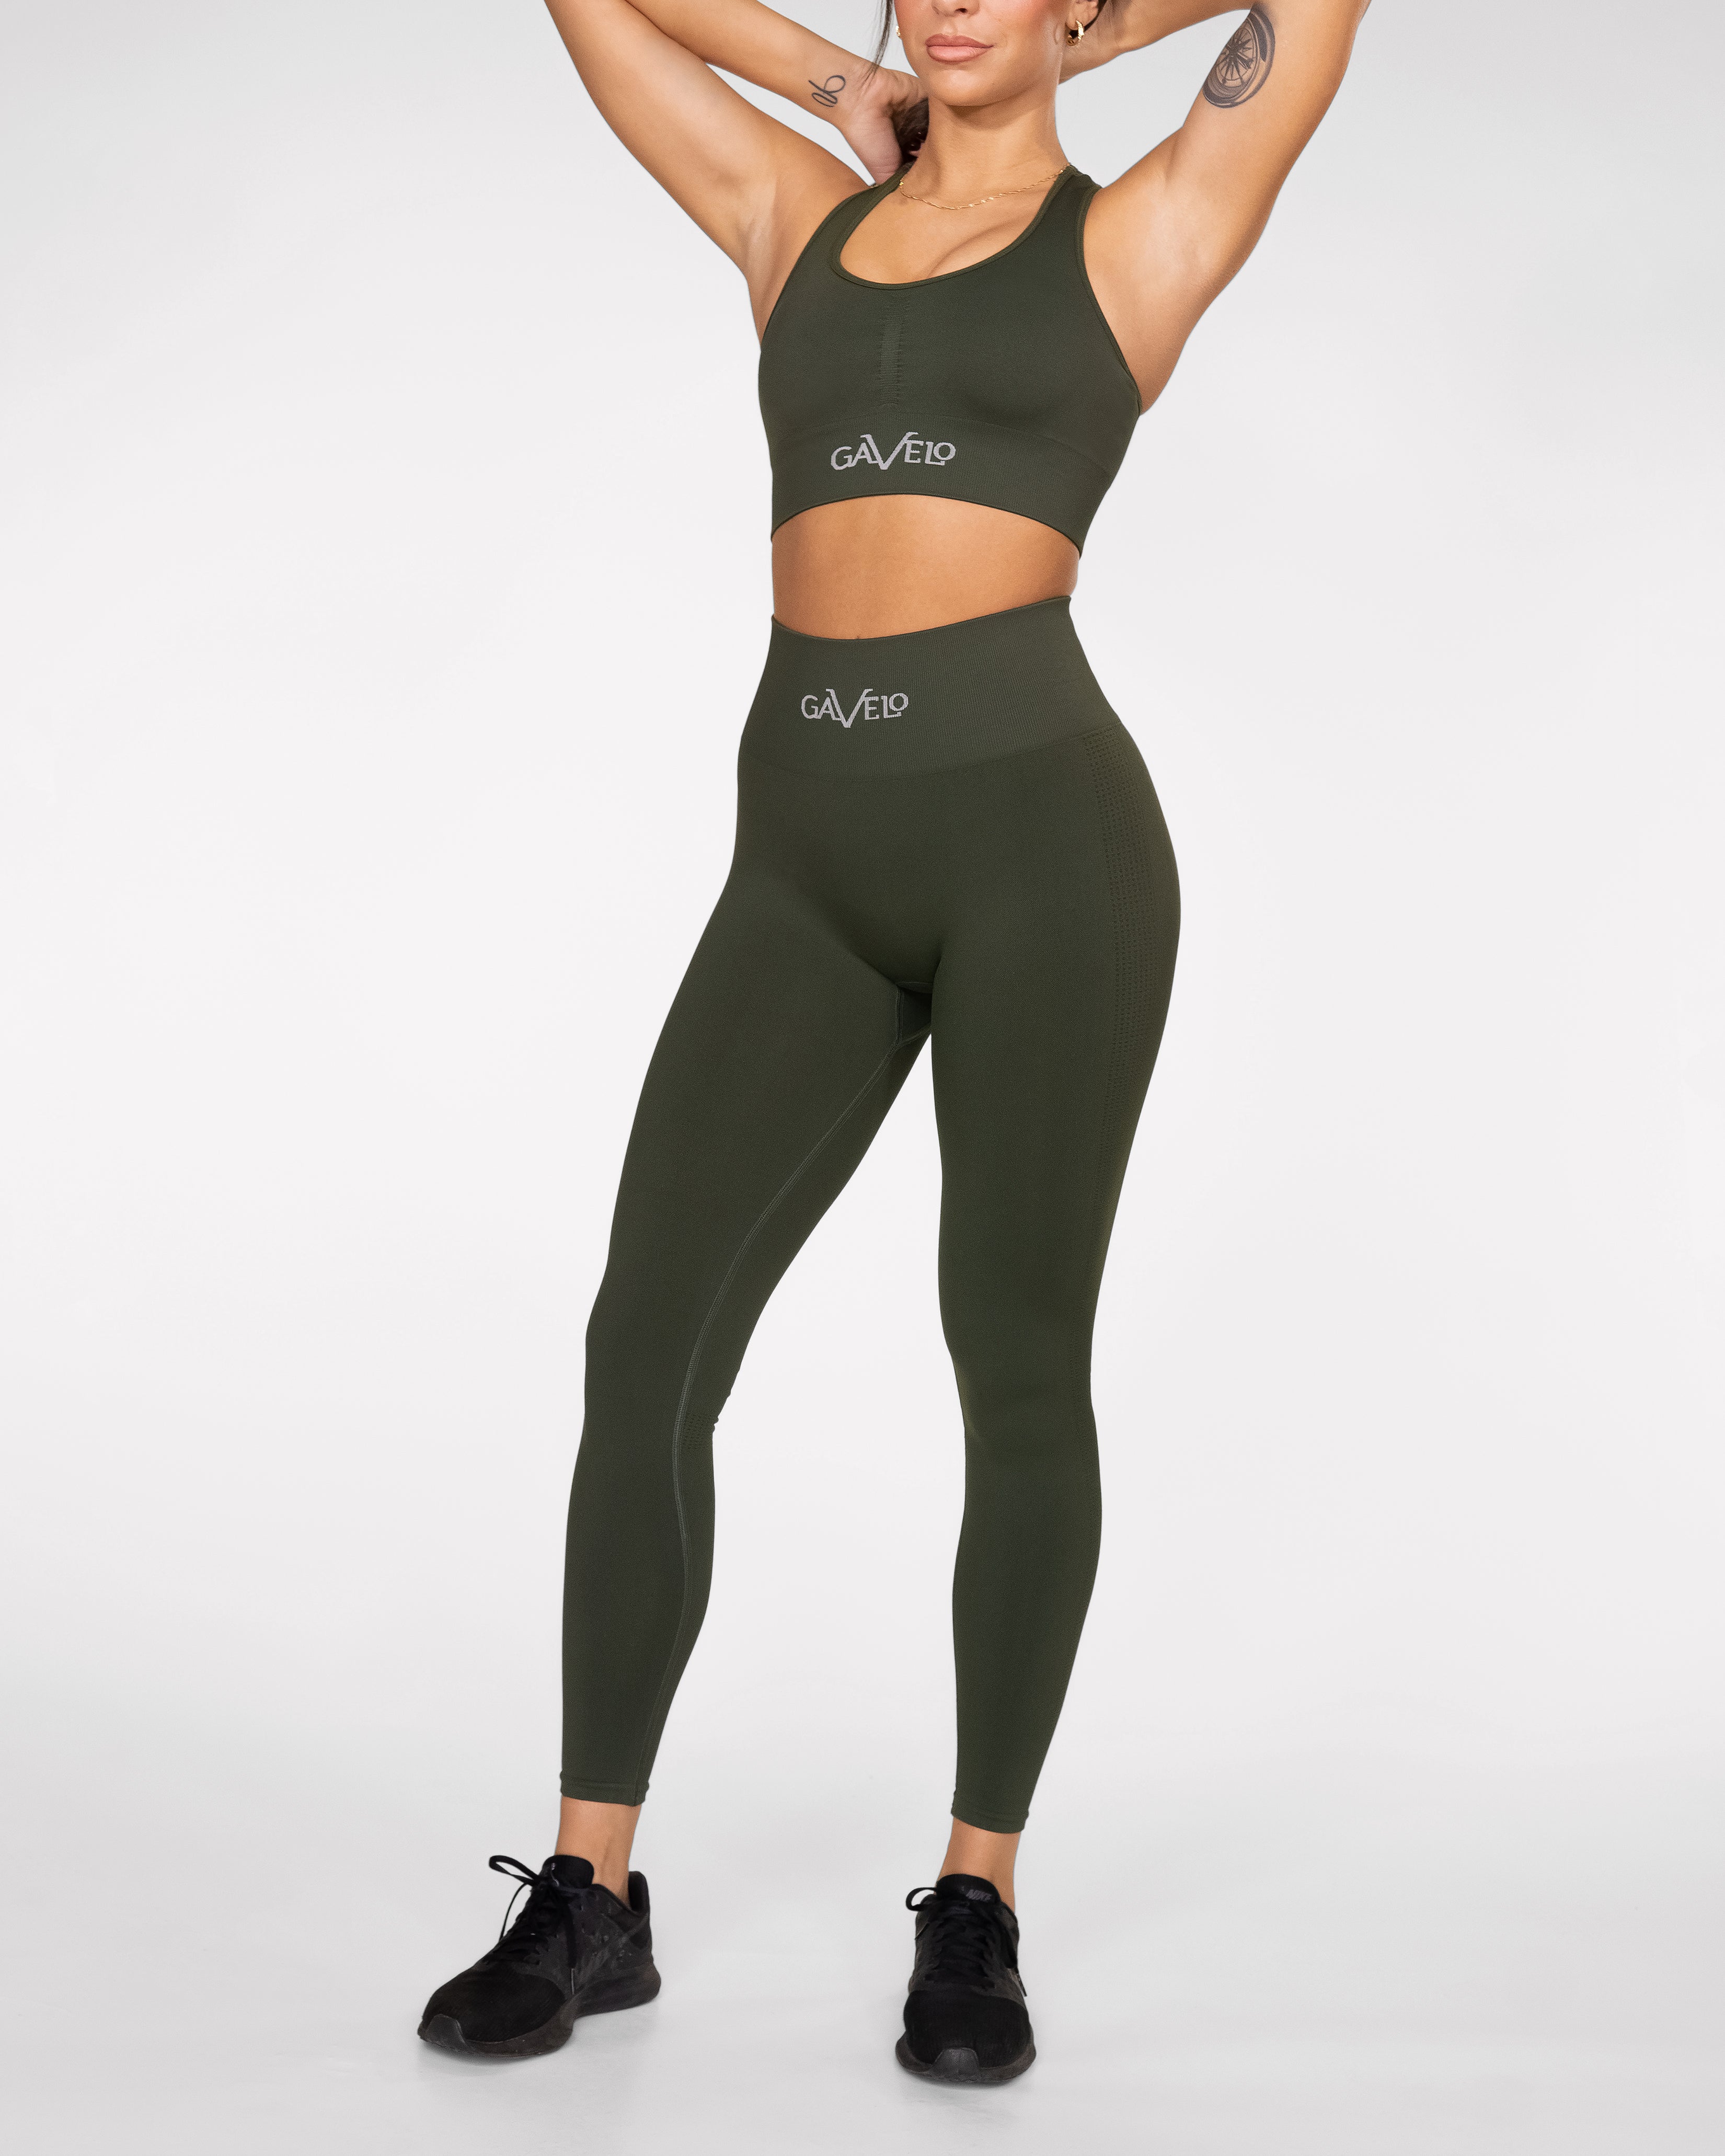 GAVELO Seamless Booster Forest Green Sports Bra